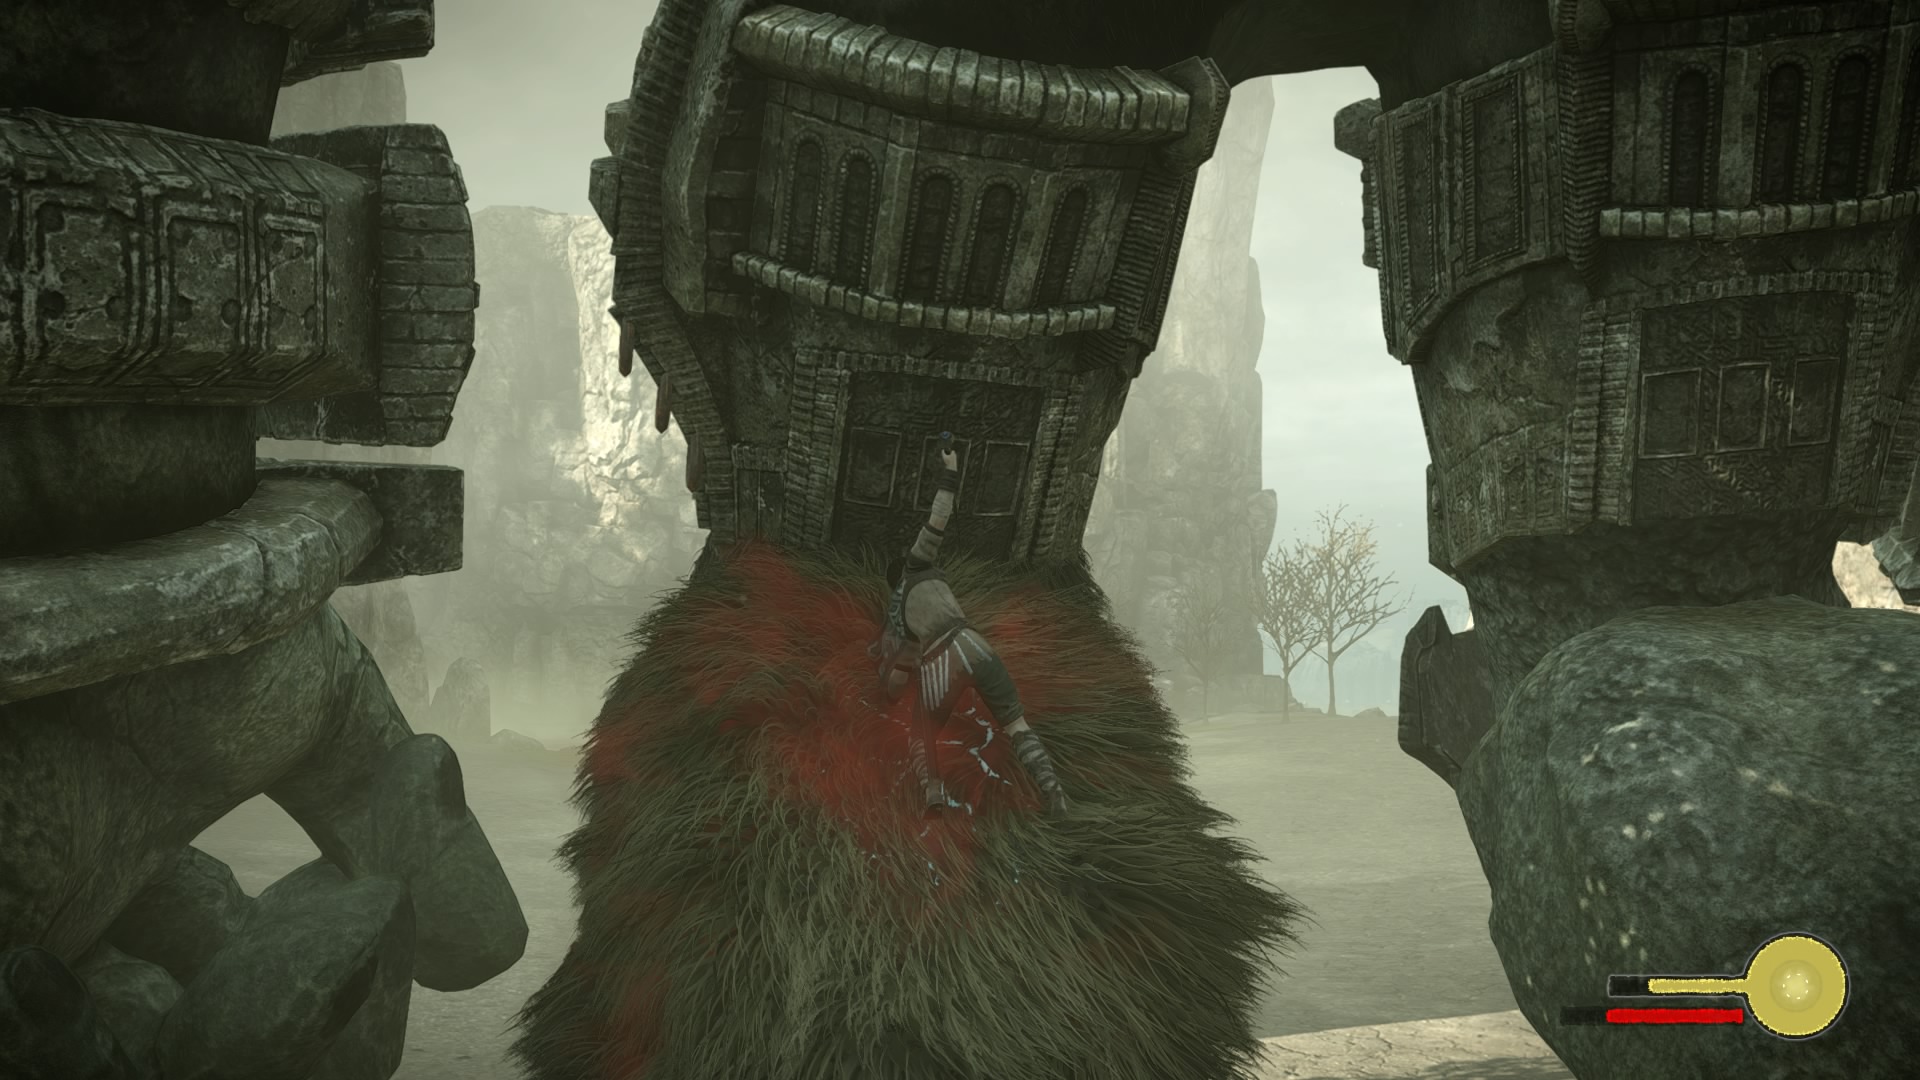 Shadow of the Colossus Remake - First Colossus